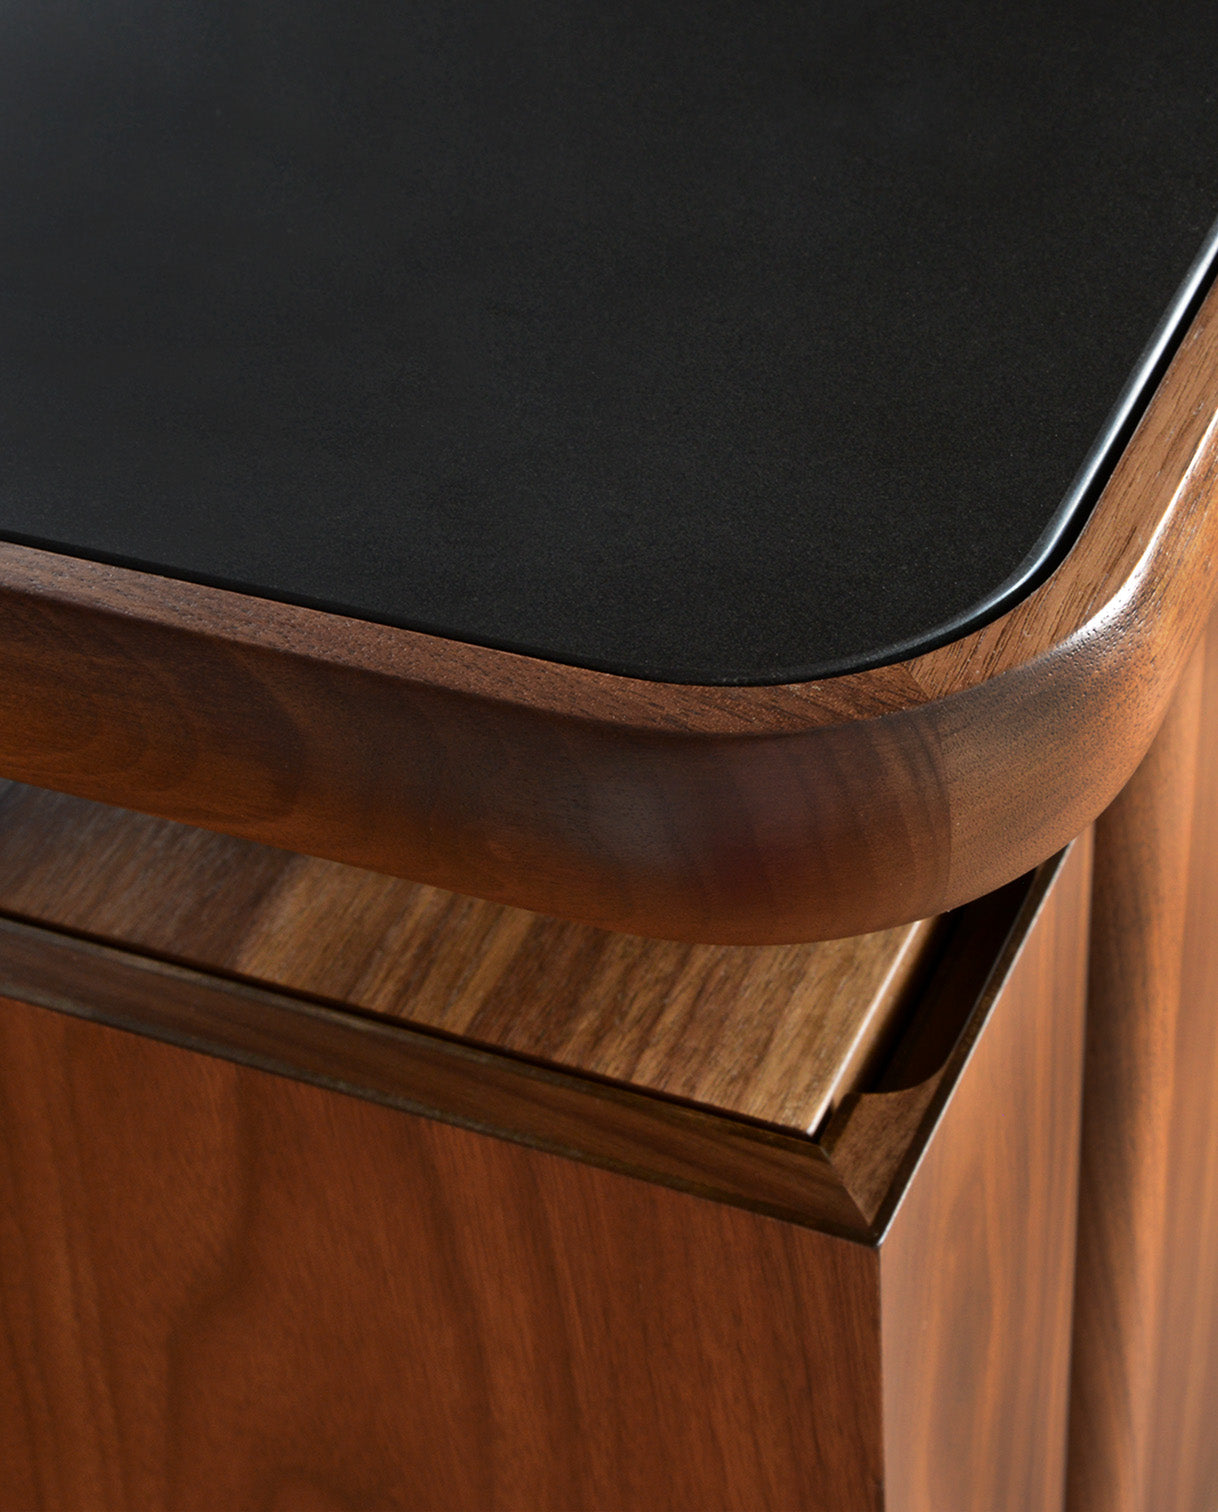 A close up of the top of a Walnut Grove Credenza showing the stone top option